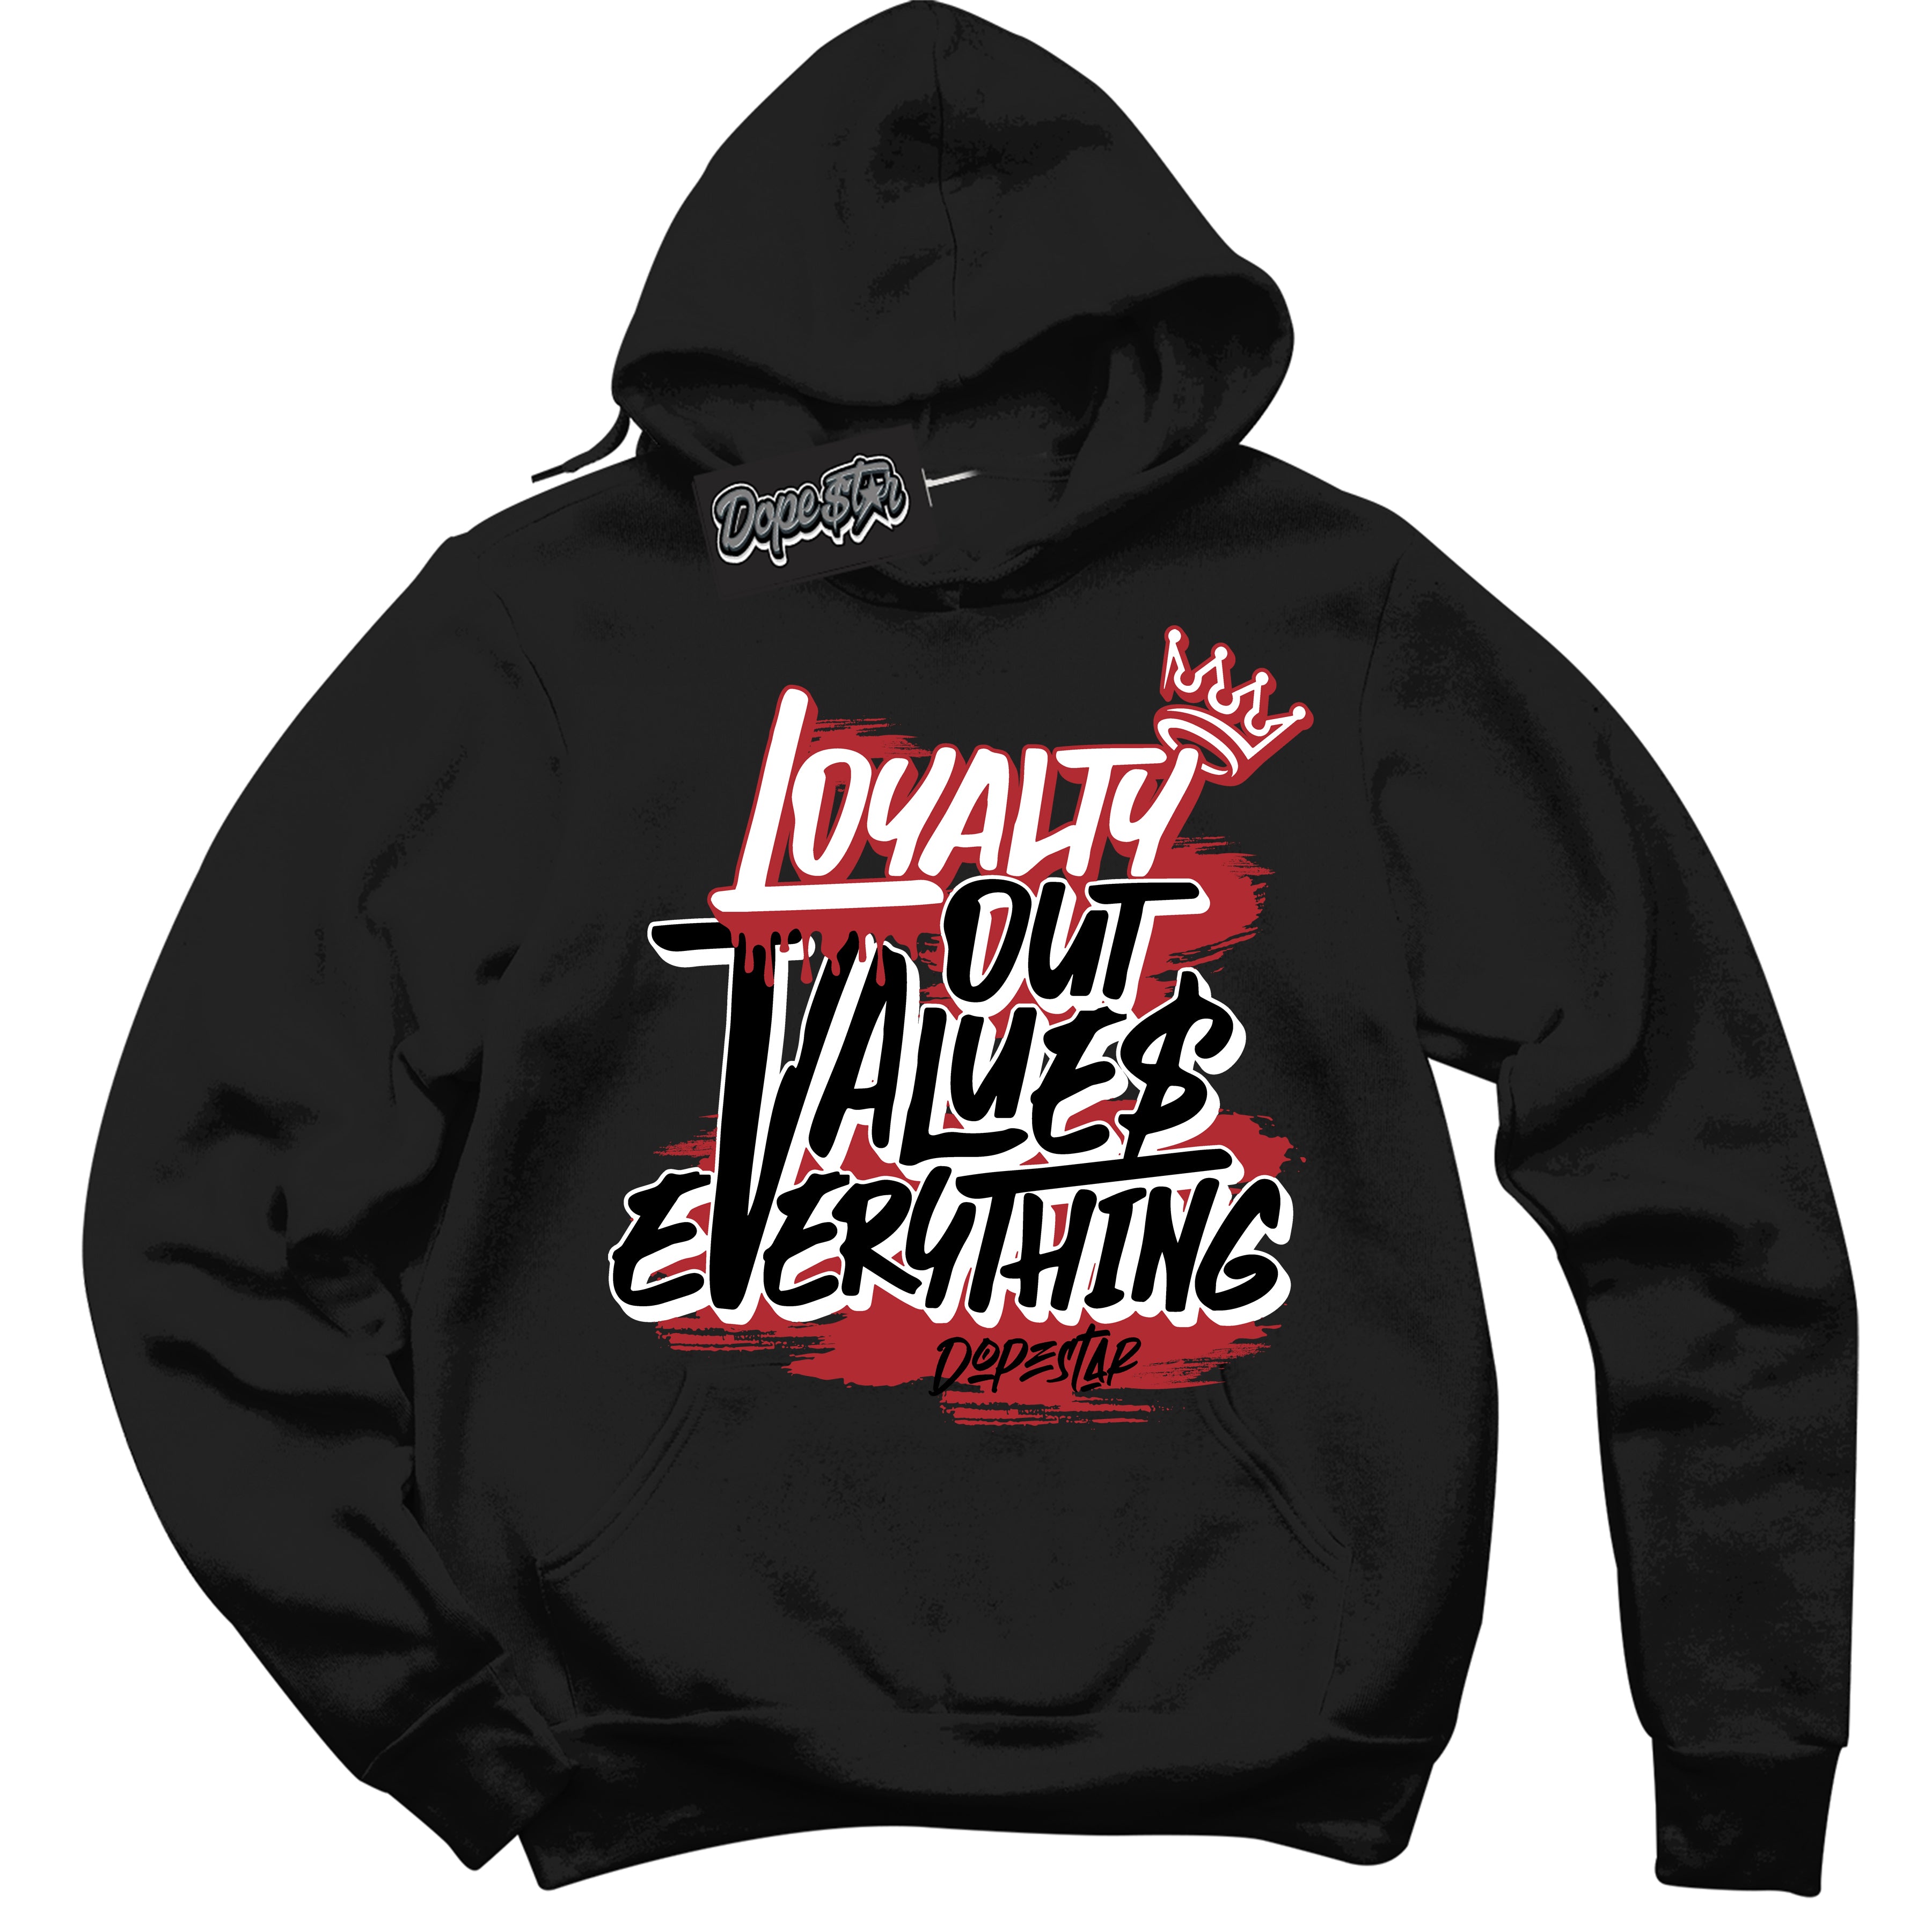 Cool Black Hoodie with “ Loyalty Out Values Everything ”  design that Perfectly Matches  Lost And Found 1s Sneakers.